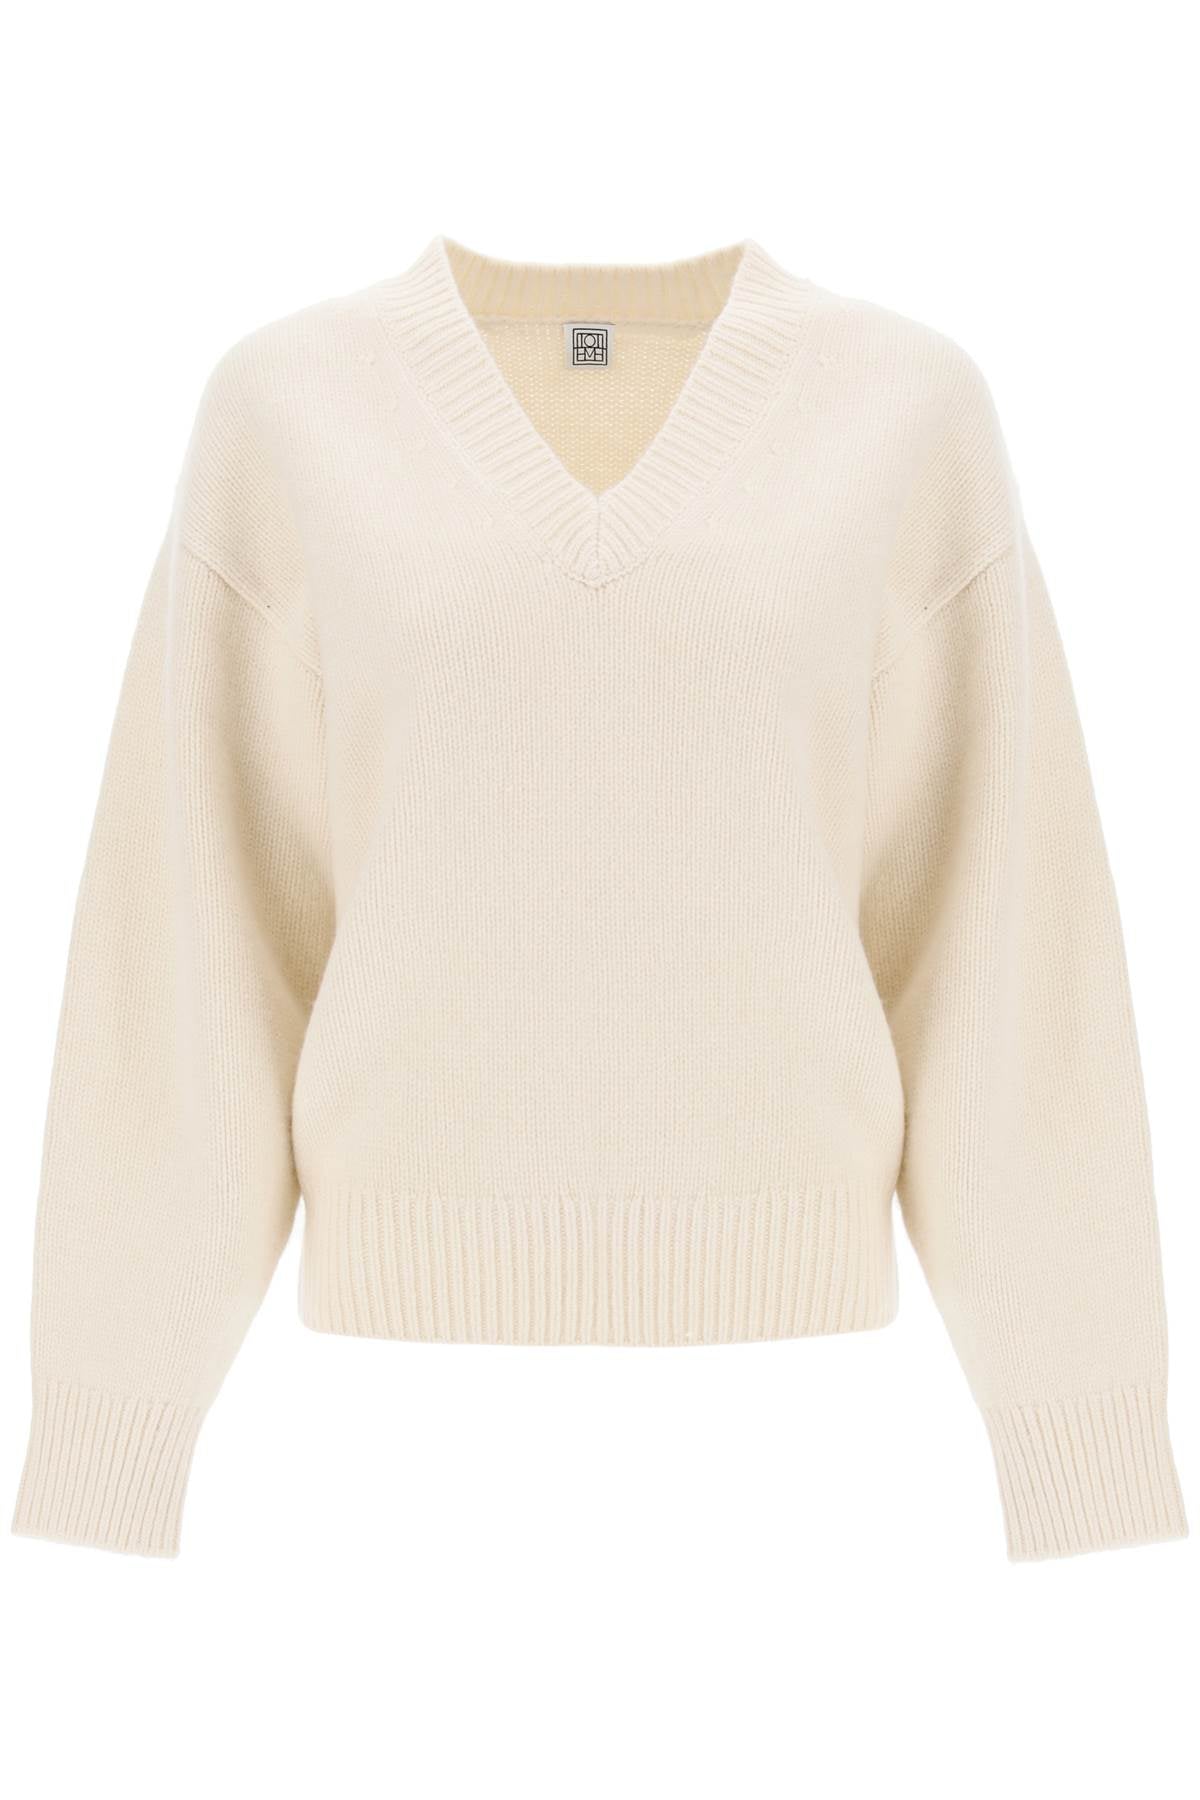 Wool And Cashmere Sweater - White